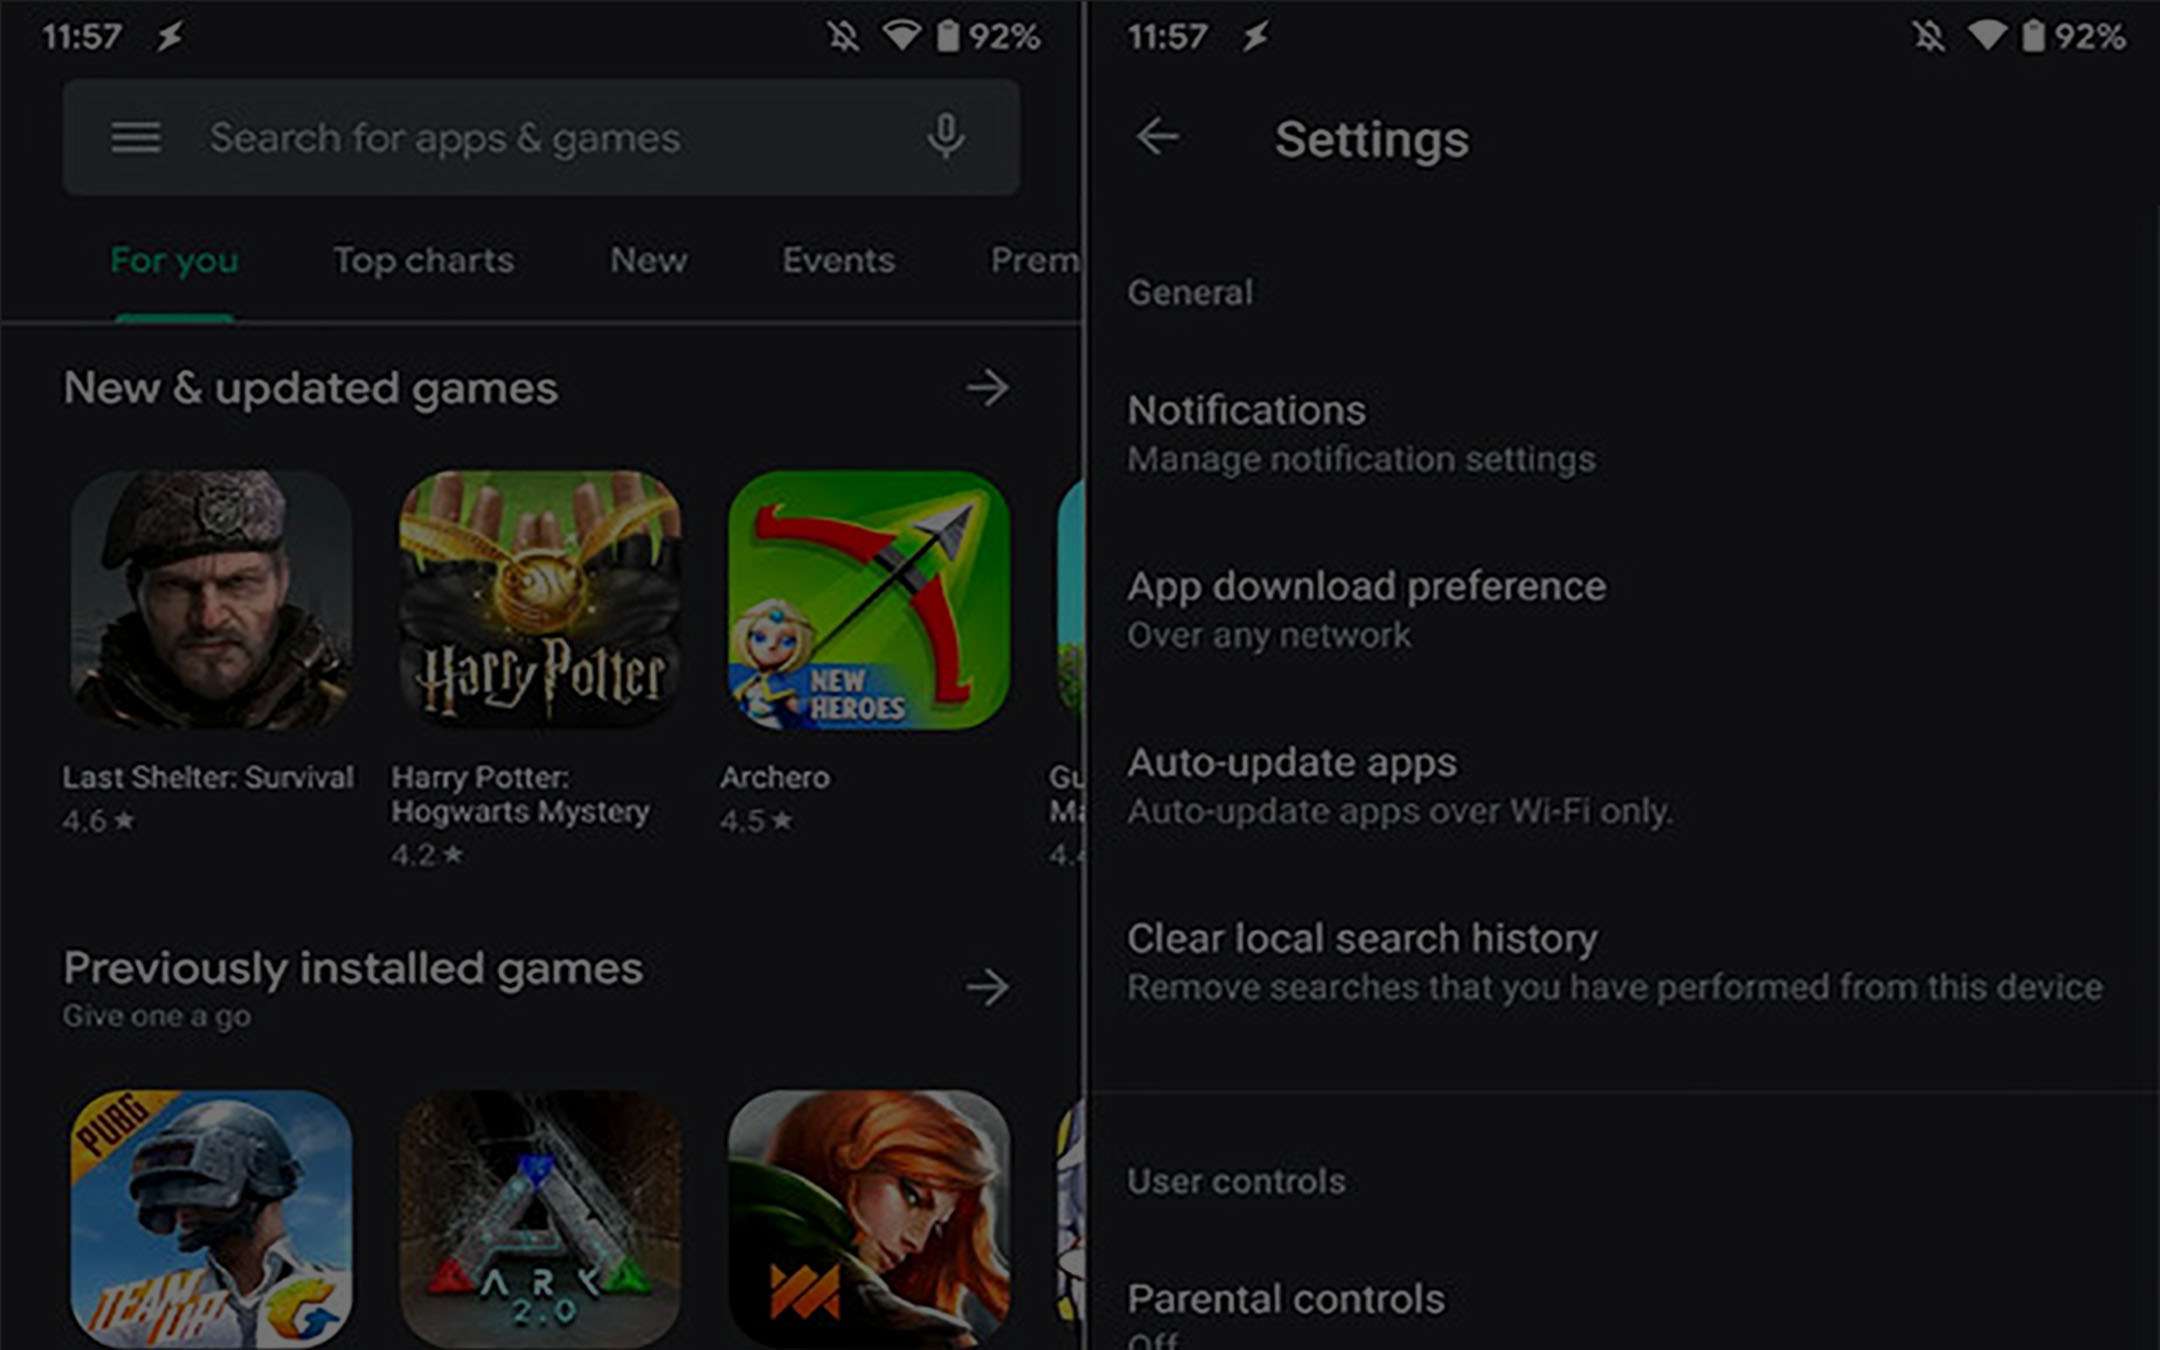 Play Store: dark theme in arrivo con Android 10